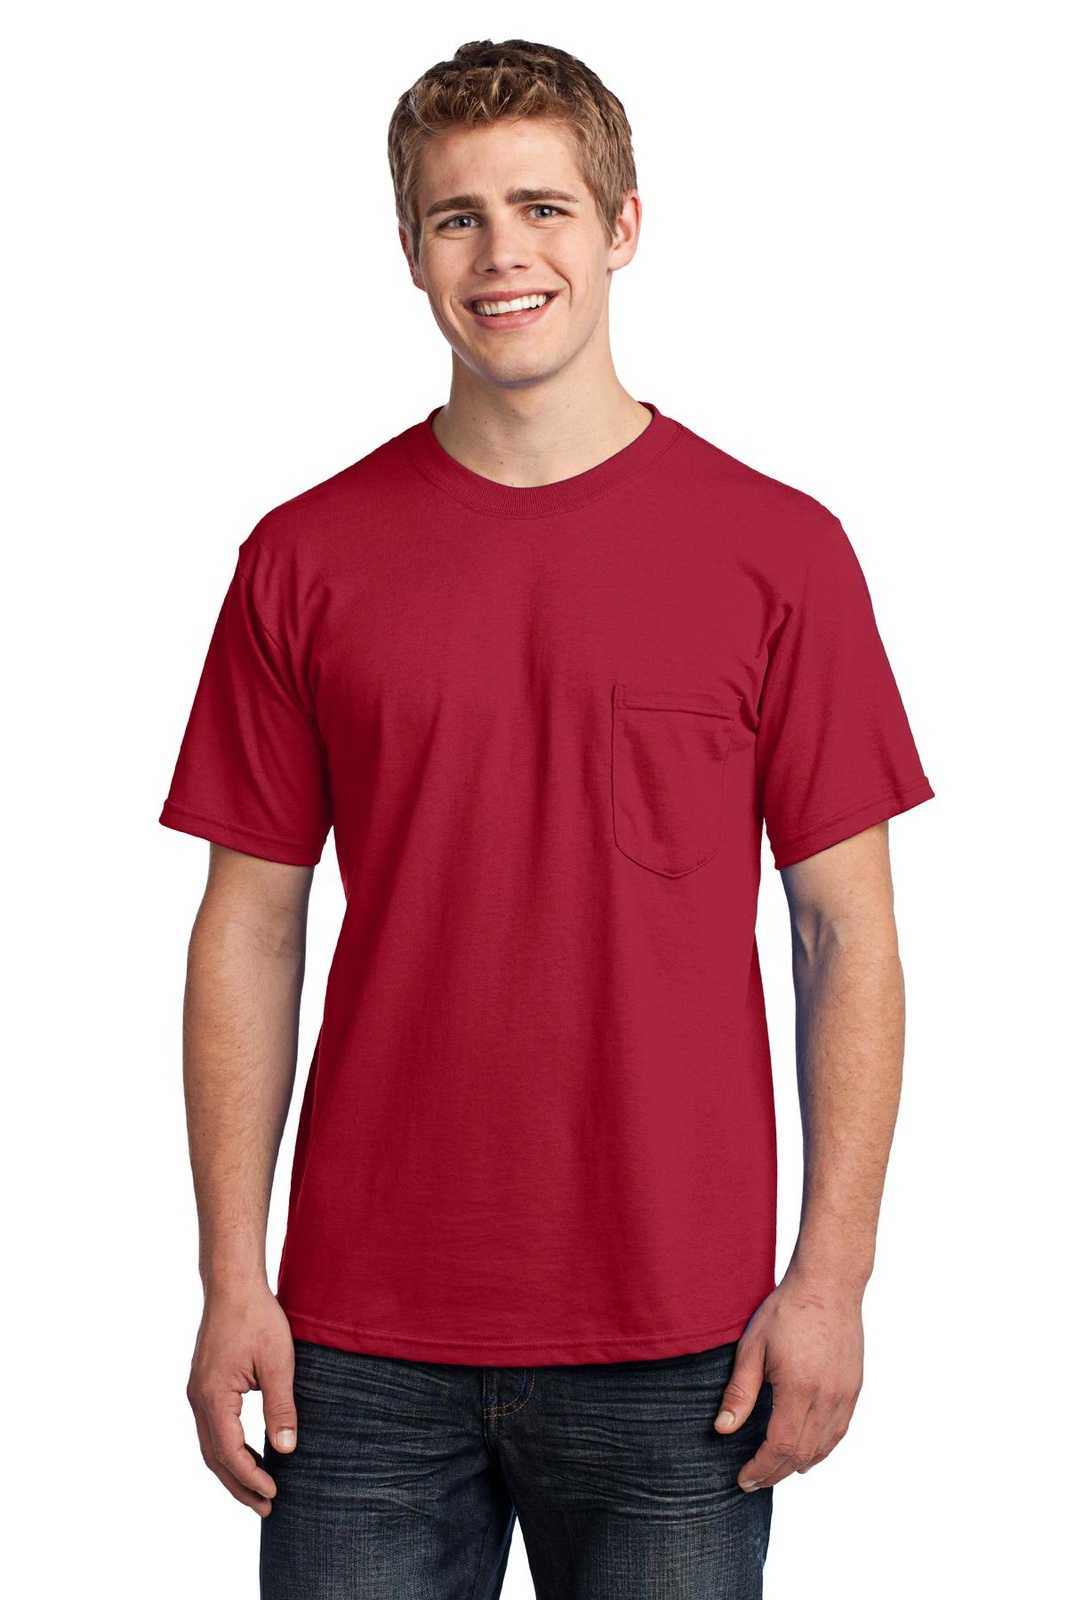 Port & Company USA100P All-American Pocket Tee - Red - HIT a Double - 1